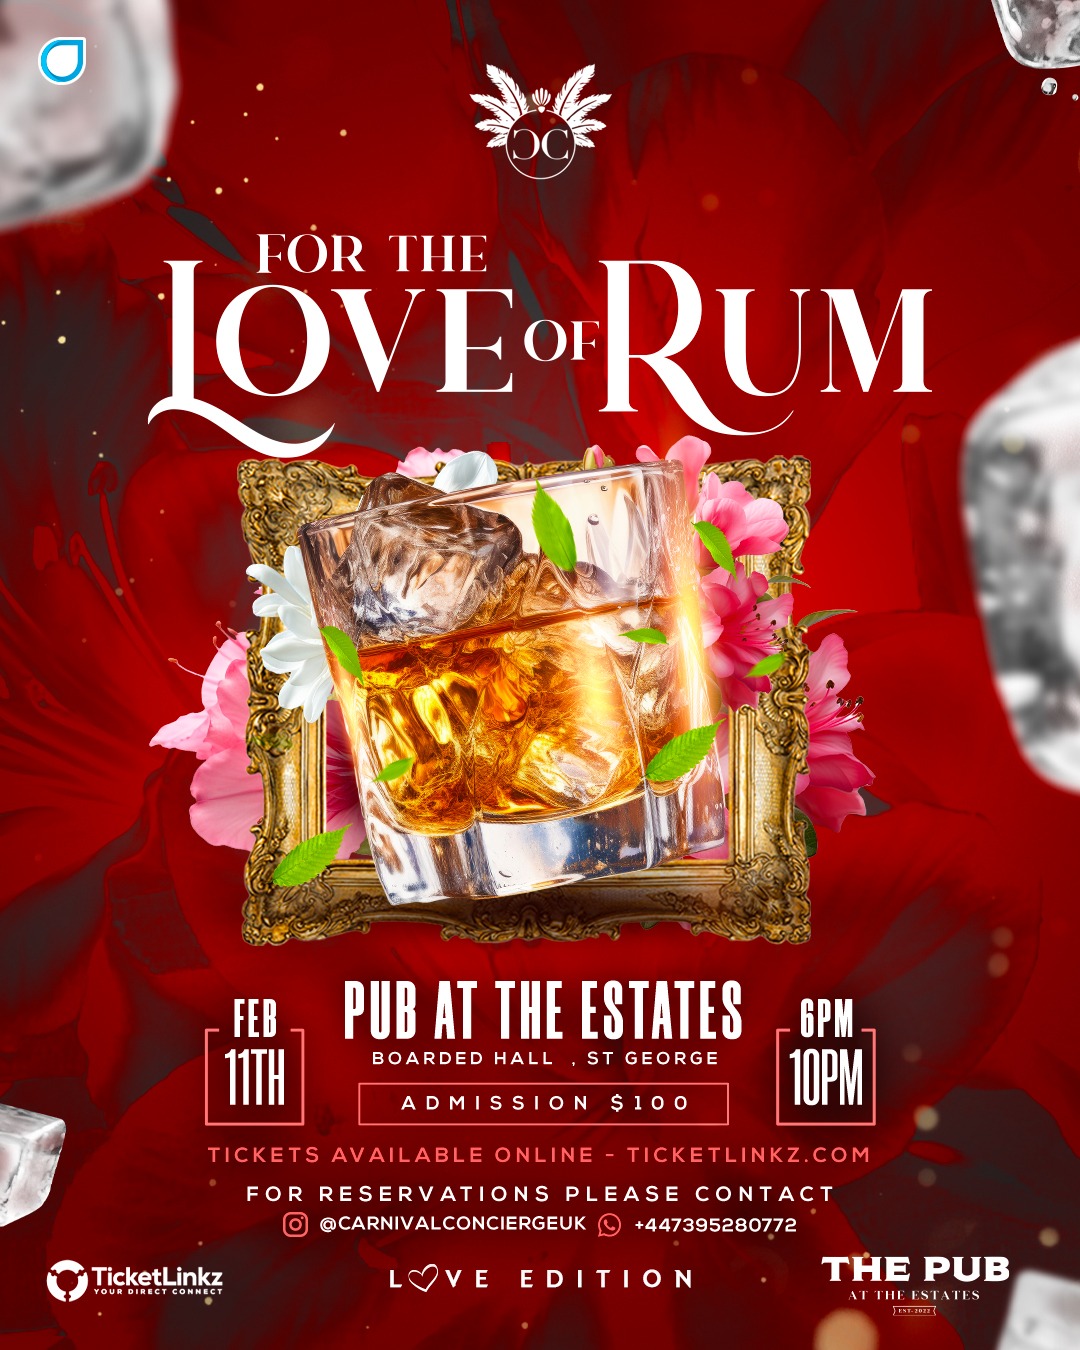 For the Love of Rum